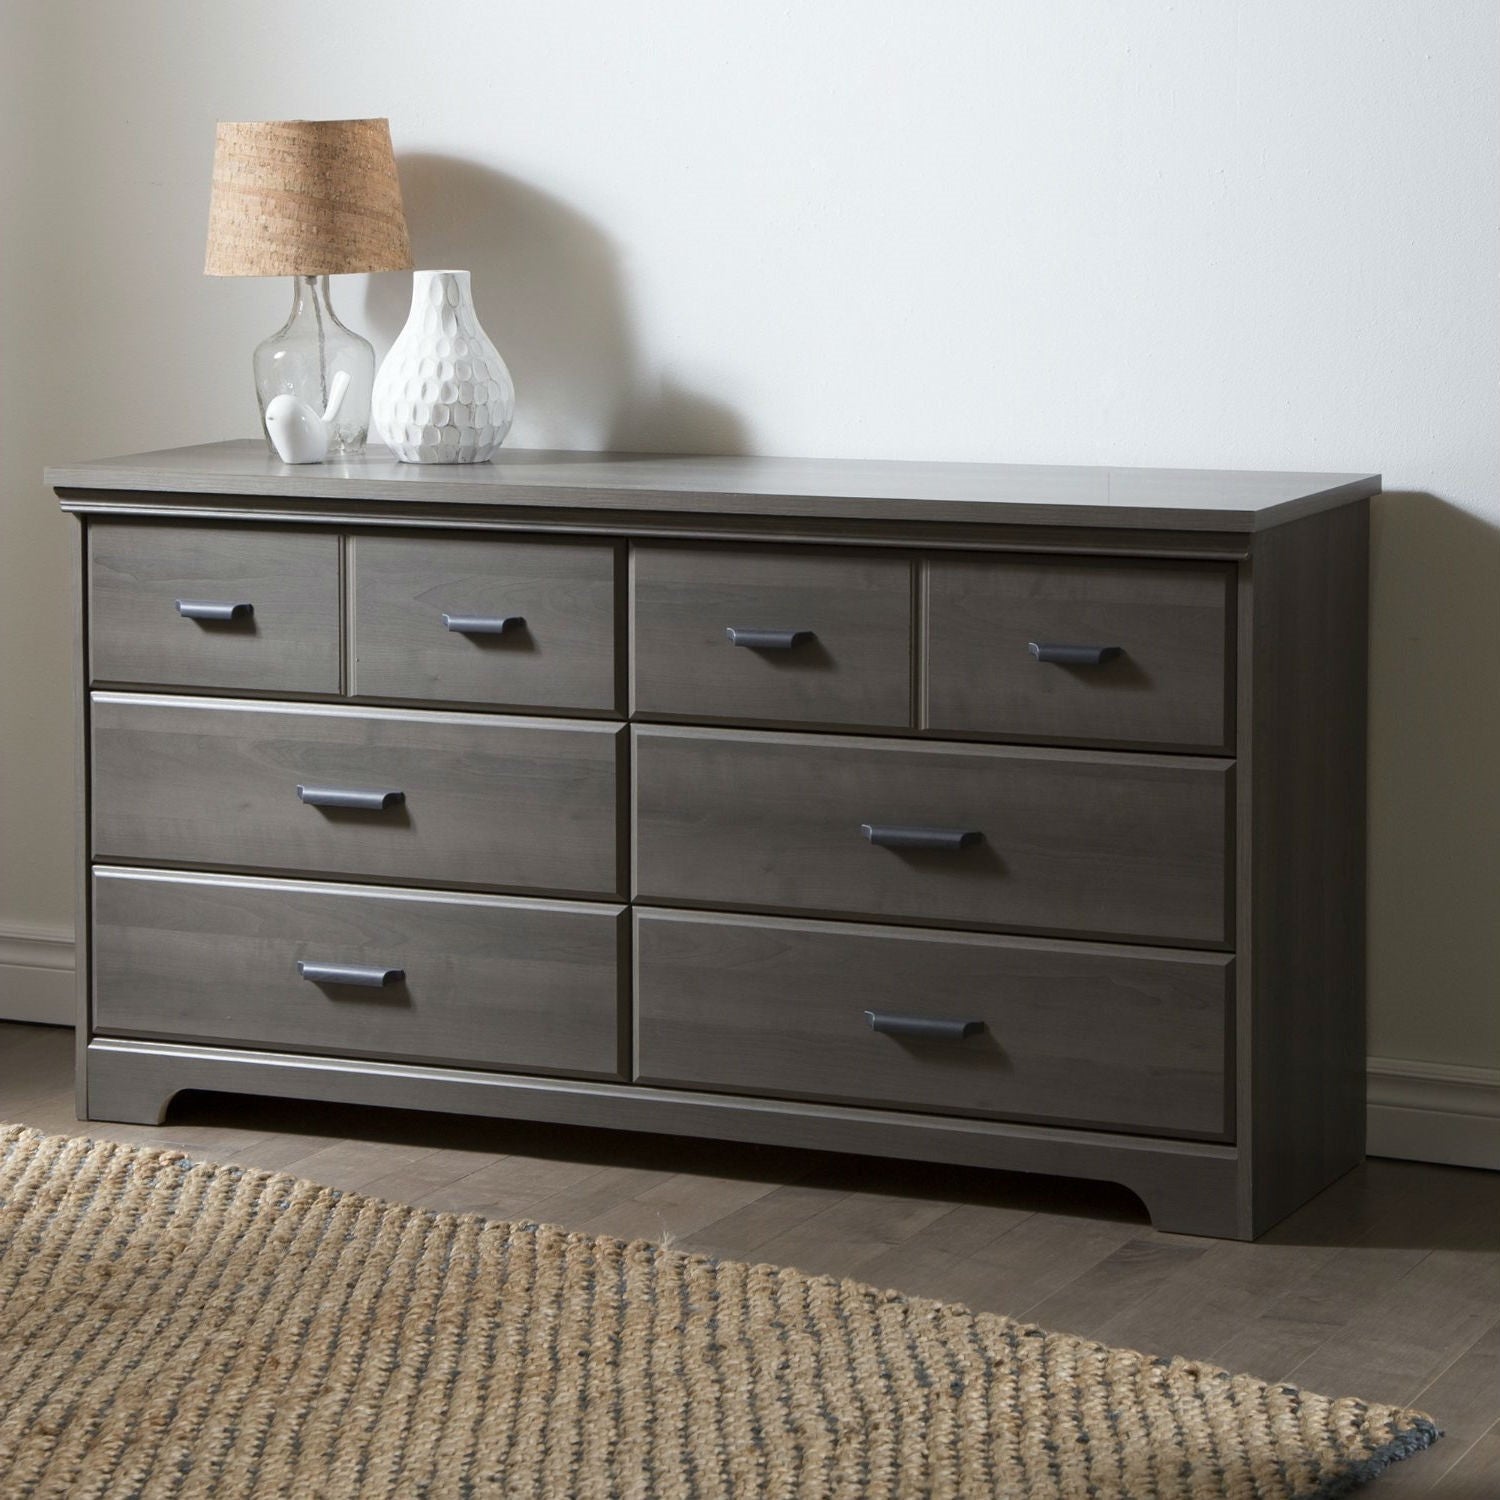 Bedroom > Nightstand And Dressers - Bedroom 6-Drawer Double Dresser Wardrobe Cabinet In Grey Maple Finish